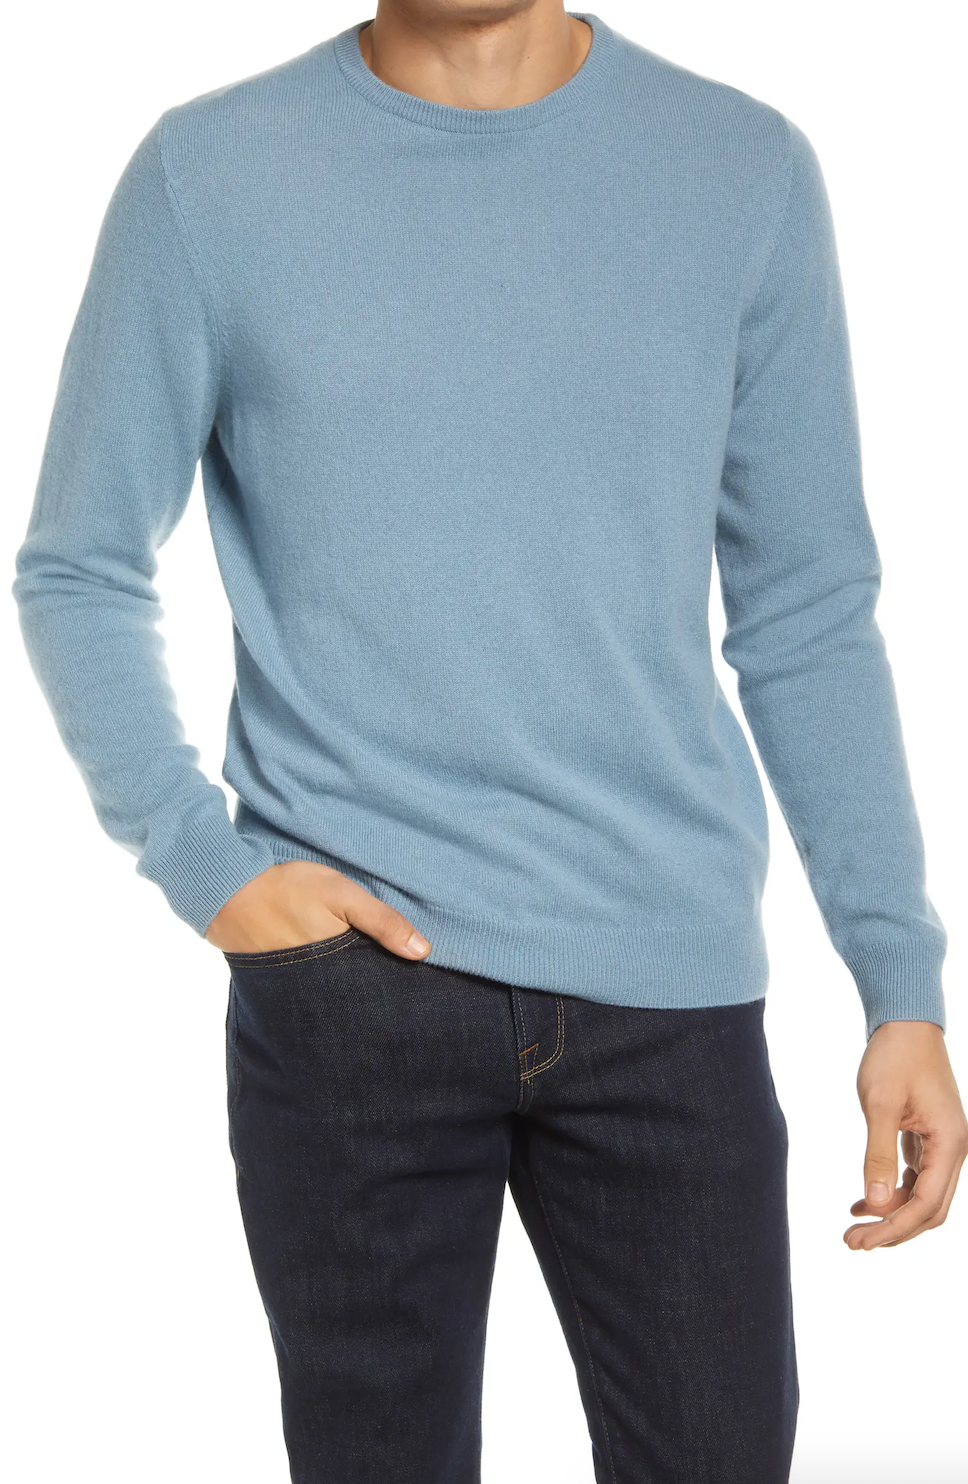 Men’s Cashmere Crewneck Sweater by Nordstrom